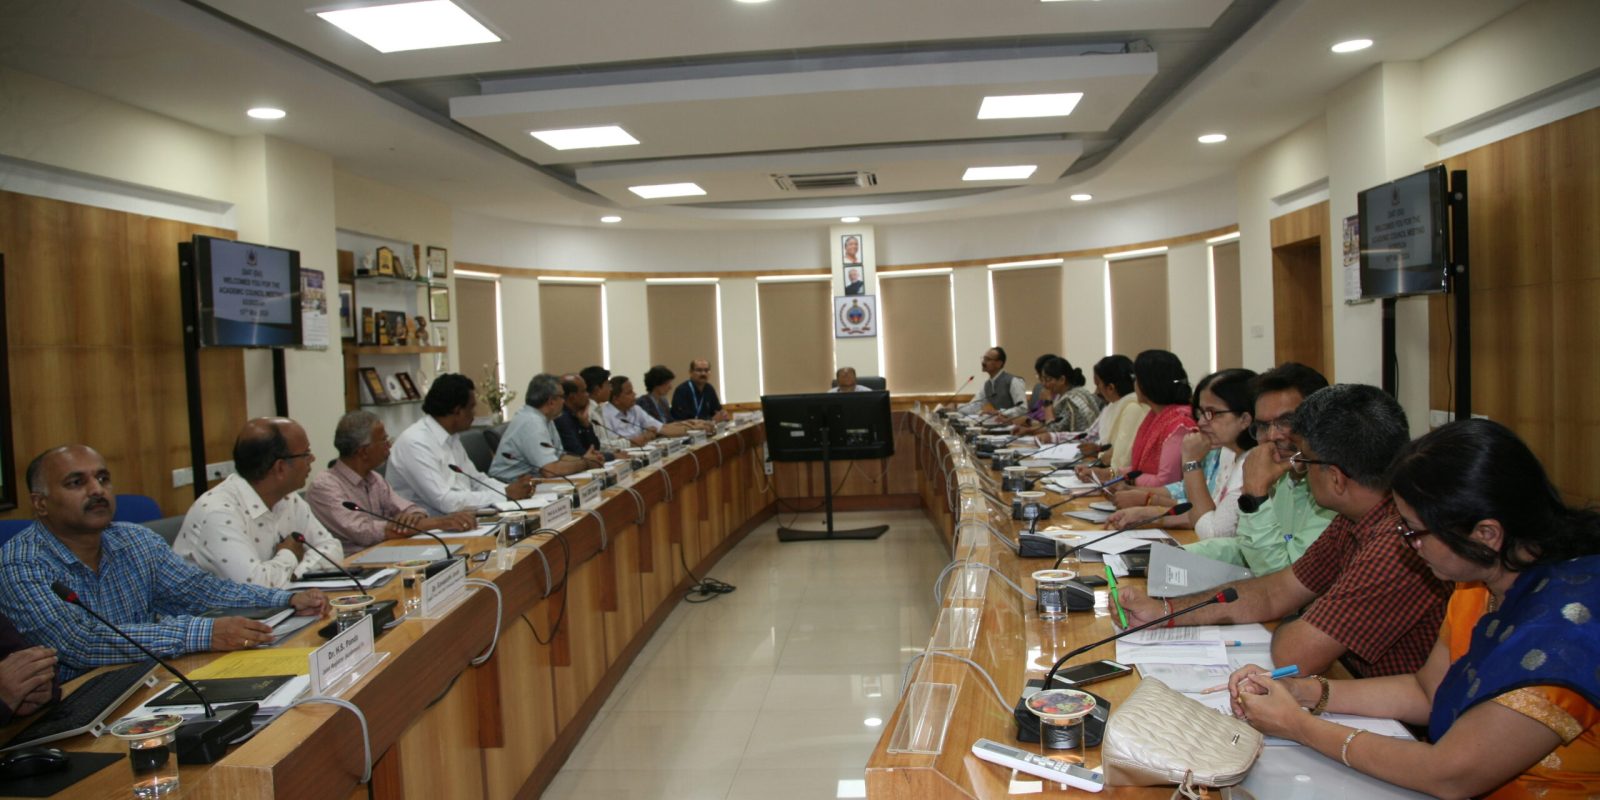 The Academic Council was chaired by the Vice Chancellor.